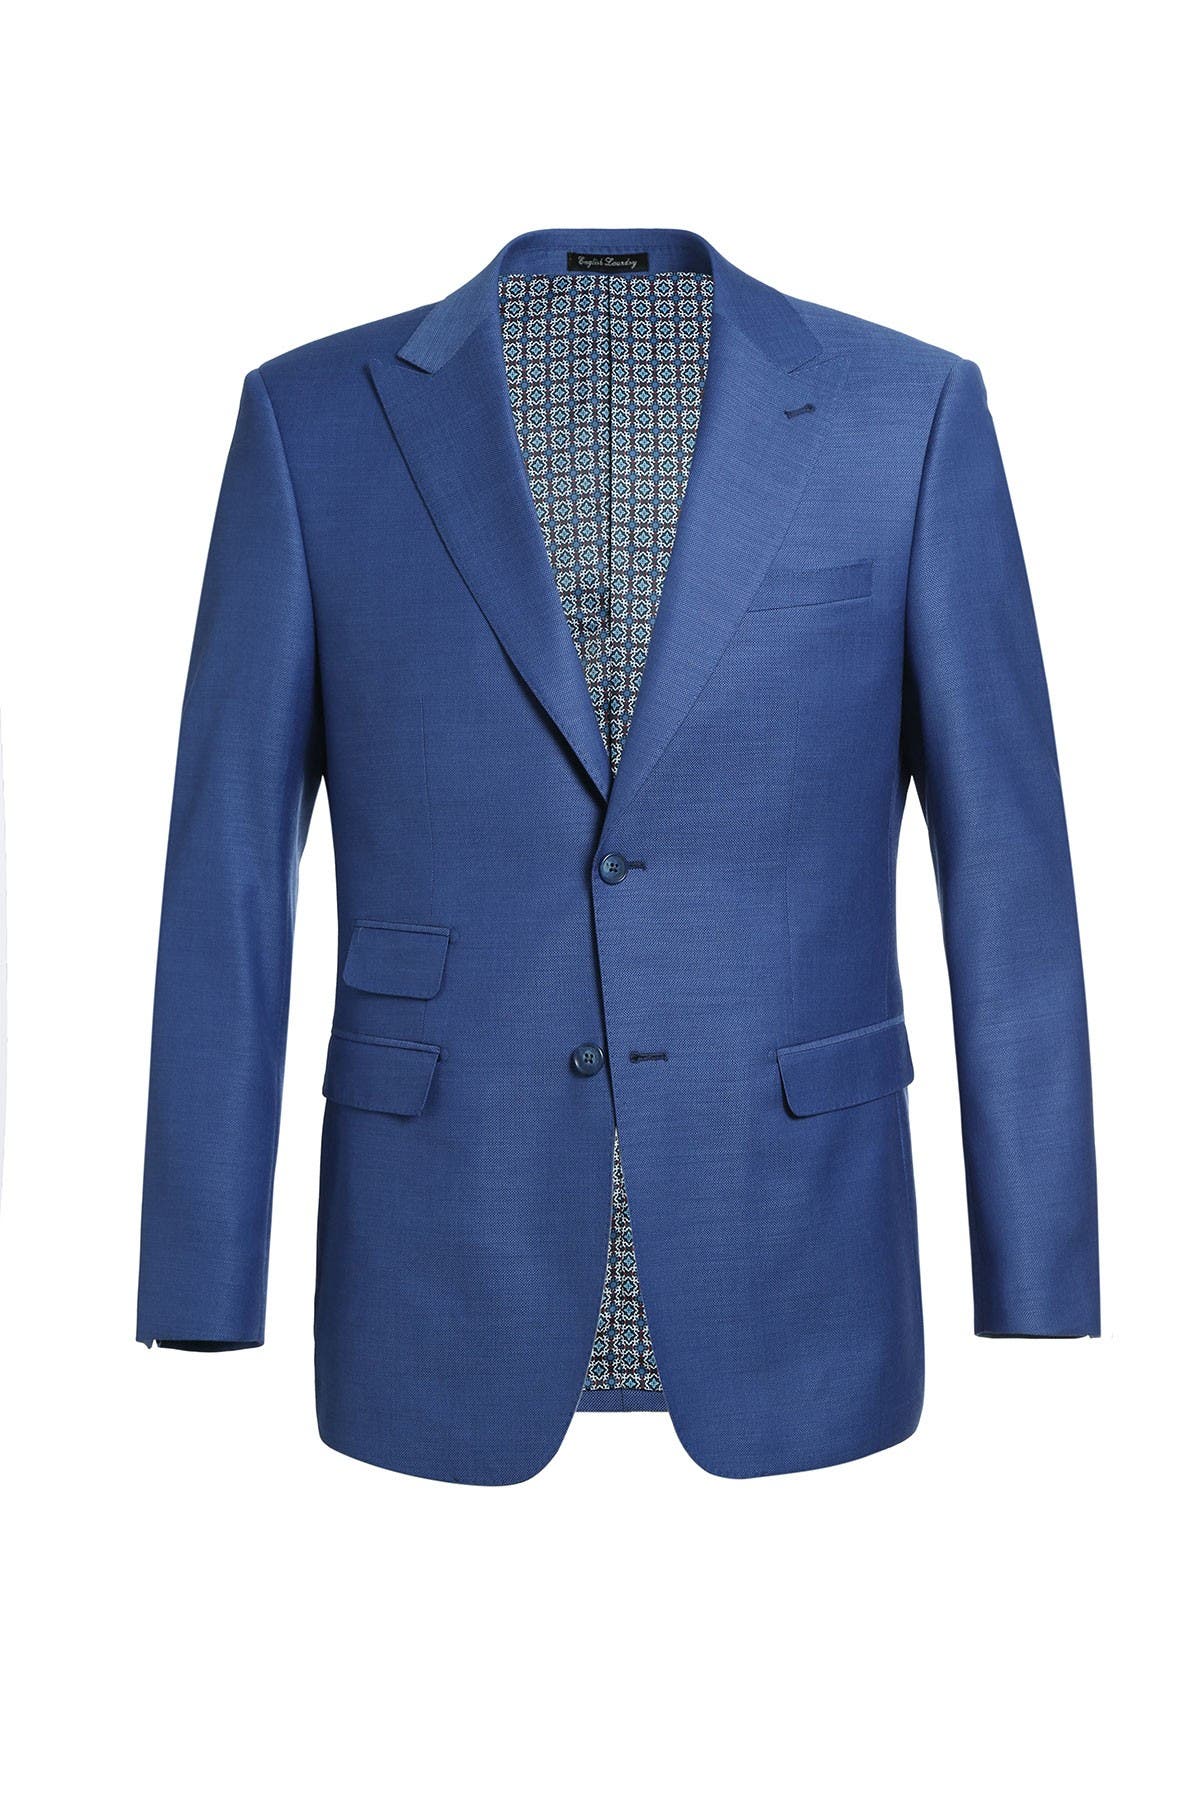 English Laundry | Solid Blue Slim Fit Two Button Notch Lapel Wool Suit ...